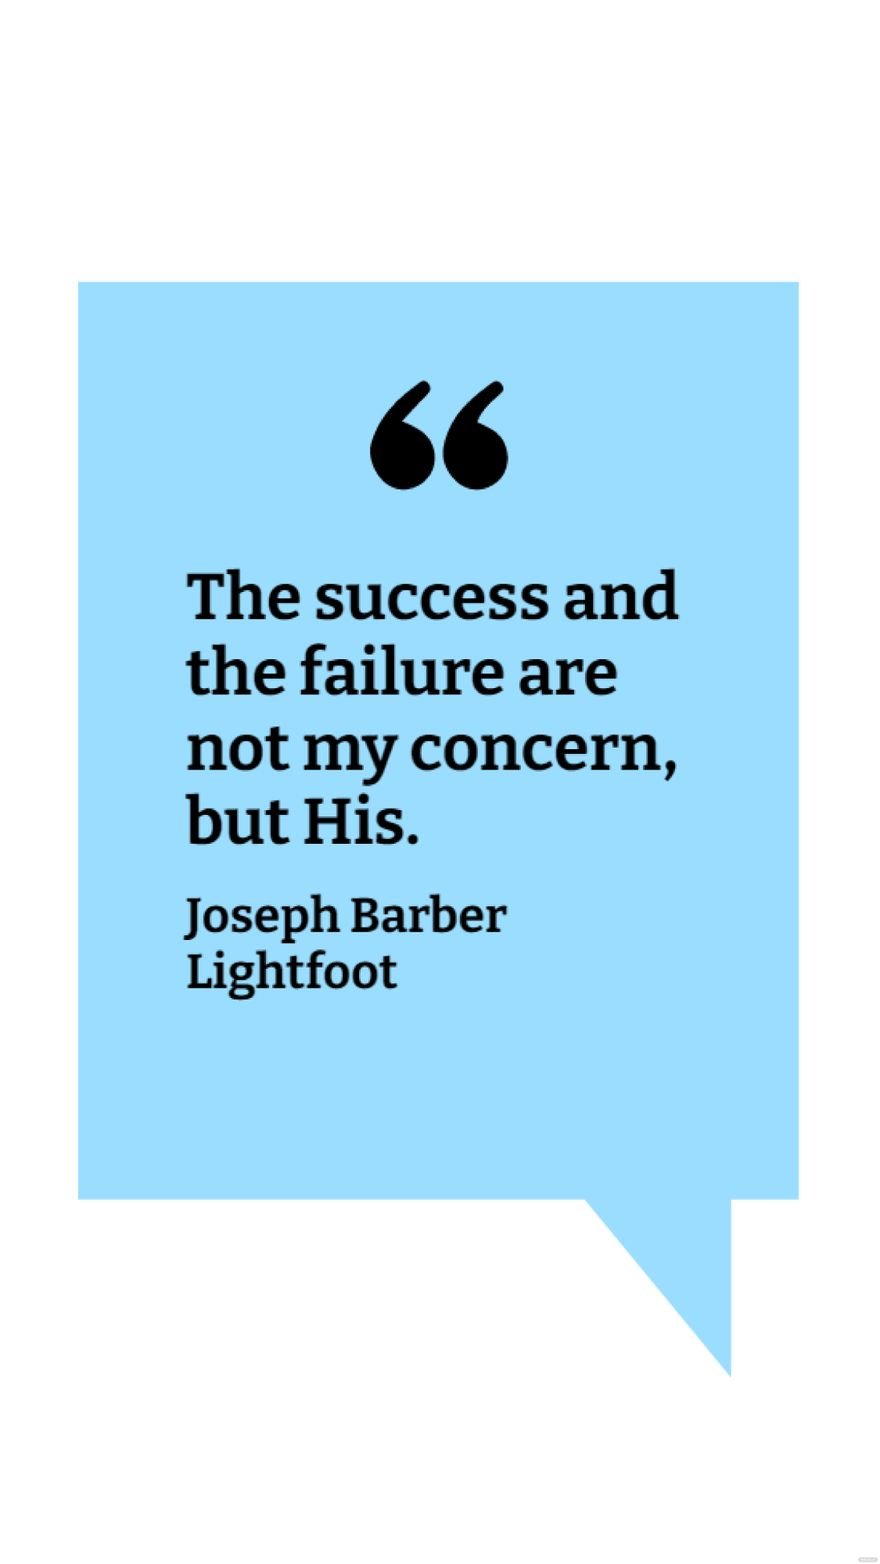 Free Joseph Barber Lightfoot - The success and the failure are not my concern, but His. in JPG